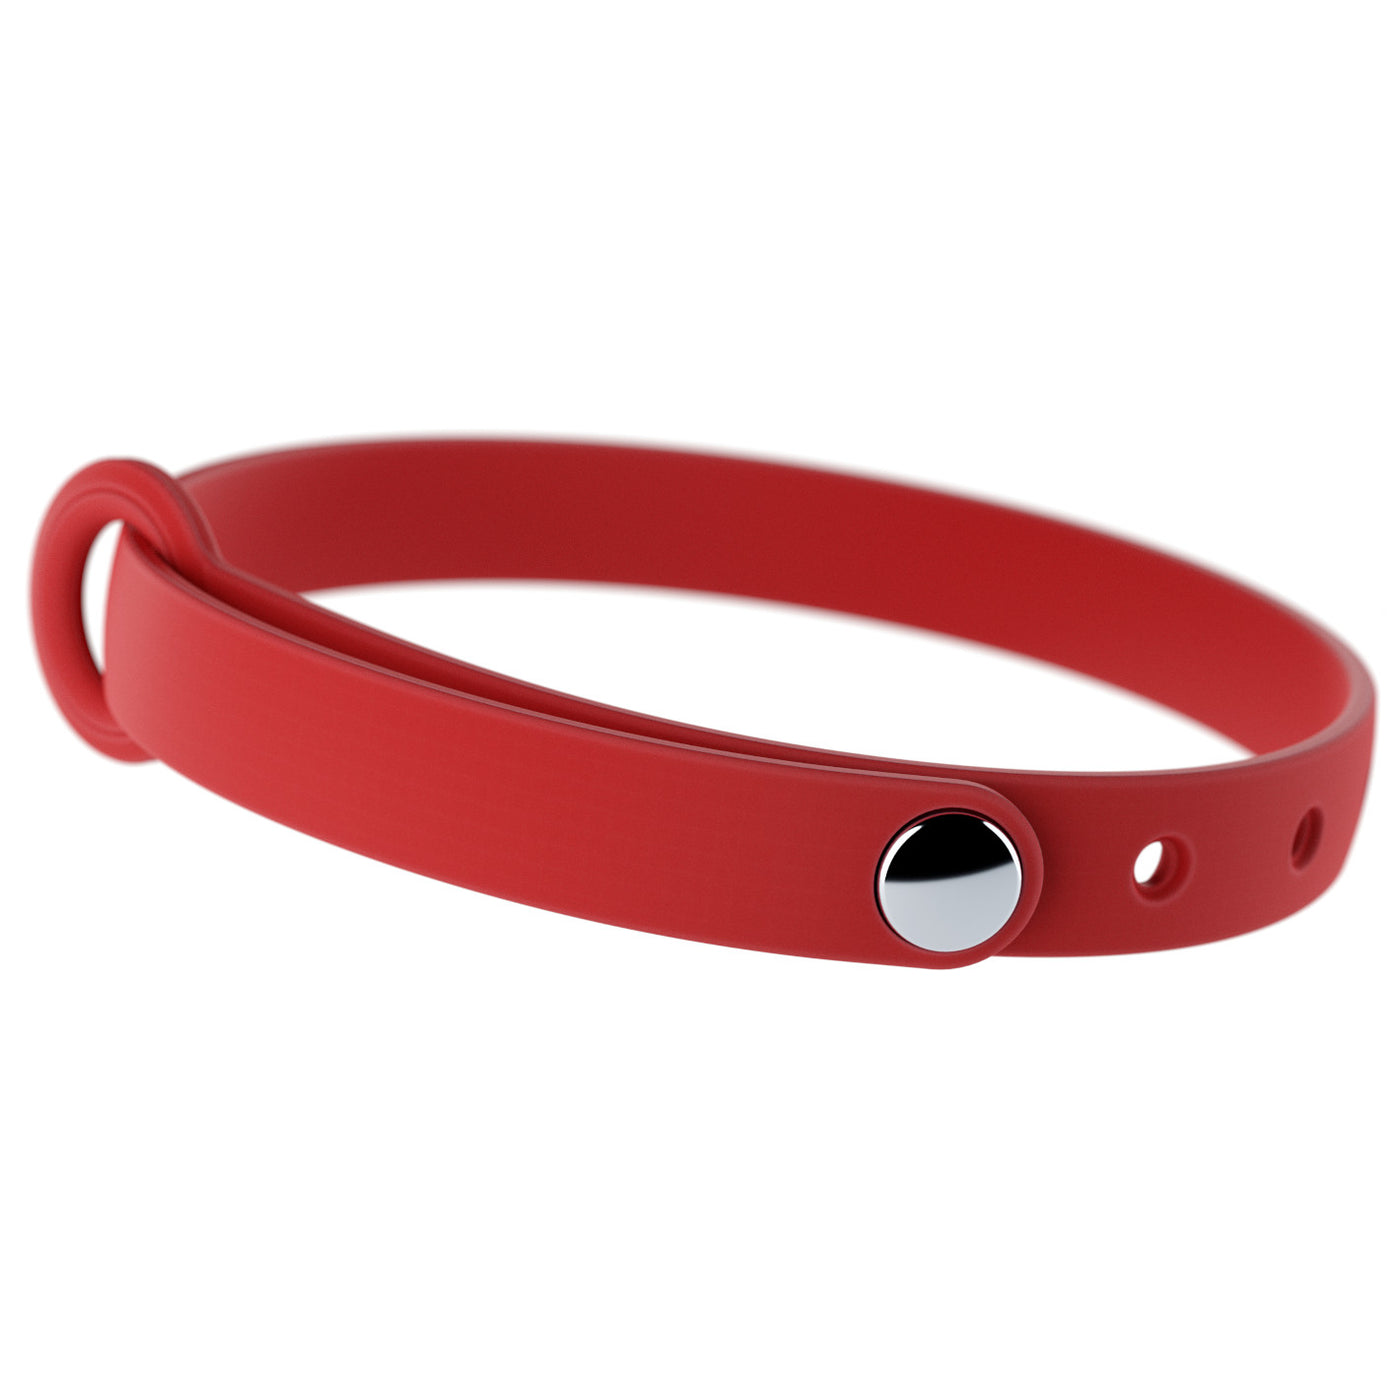 Nuvuq red cat collar with chrome snap button